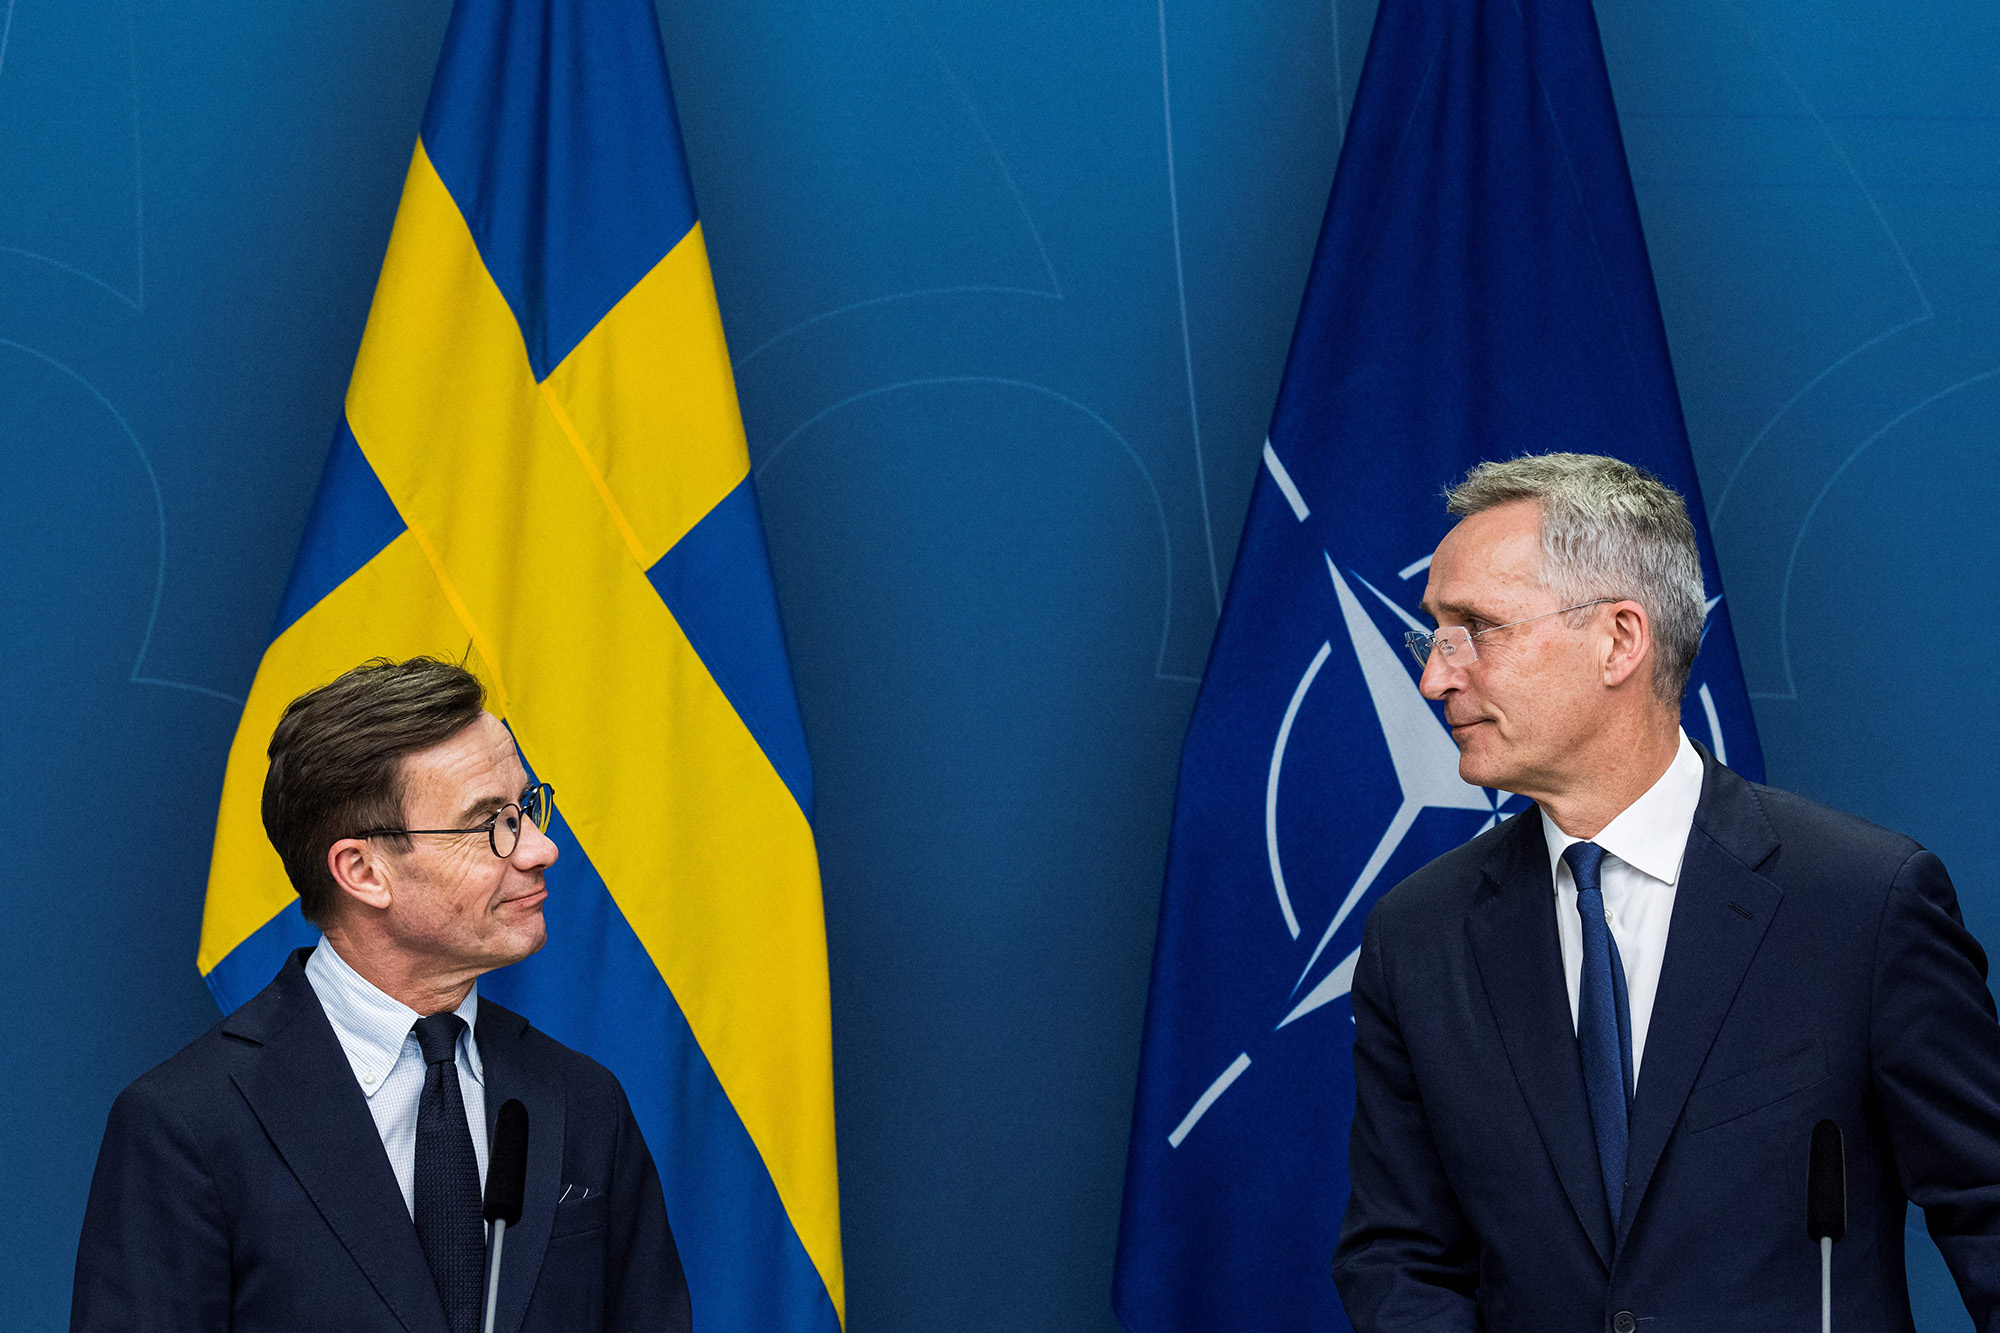 NATO Secretary General Jens Stoltenberg, right, and Swedish Prime Minister Ulf Kristersson look at each other as they address a joint press conference in Stockholm, Sweden, on March 7.